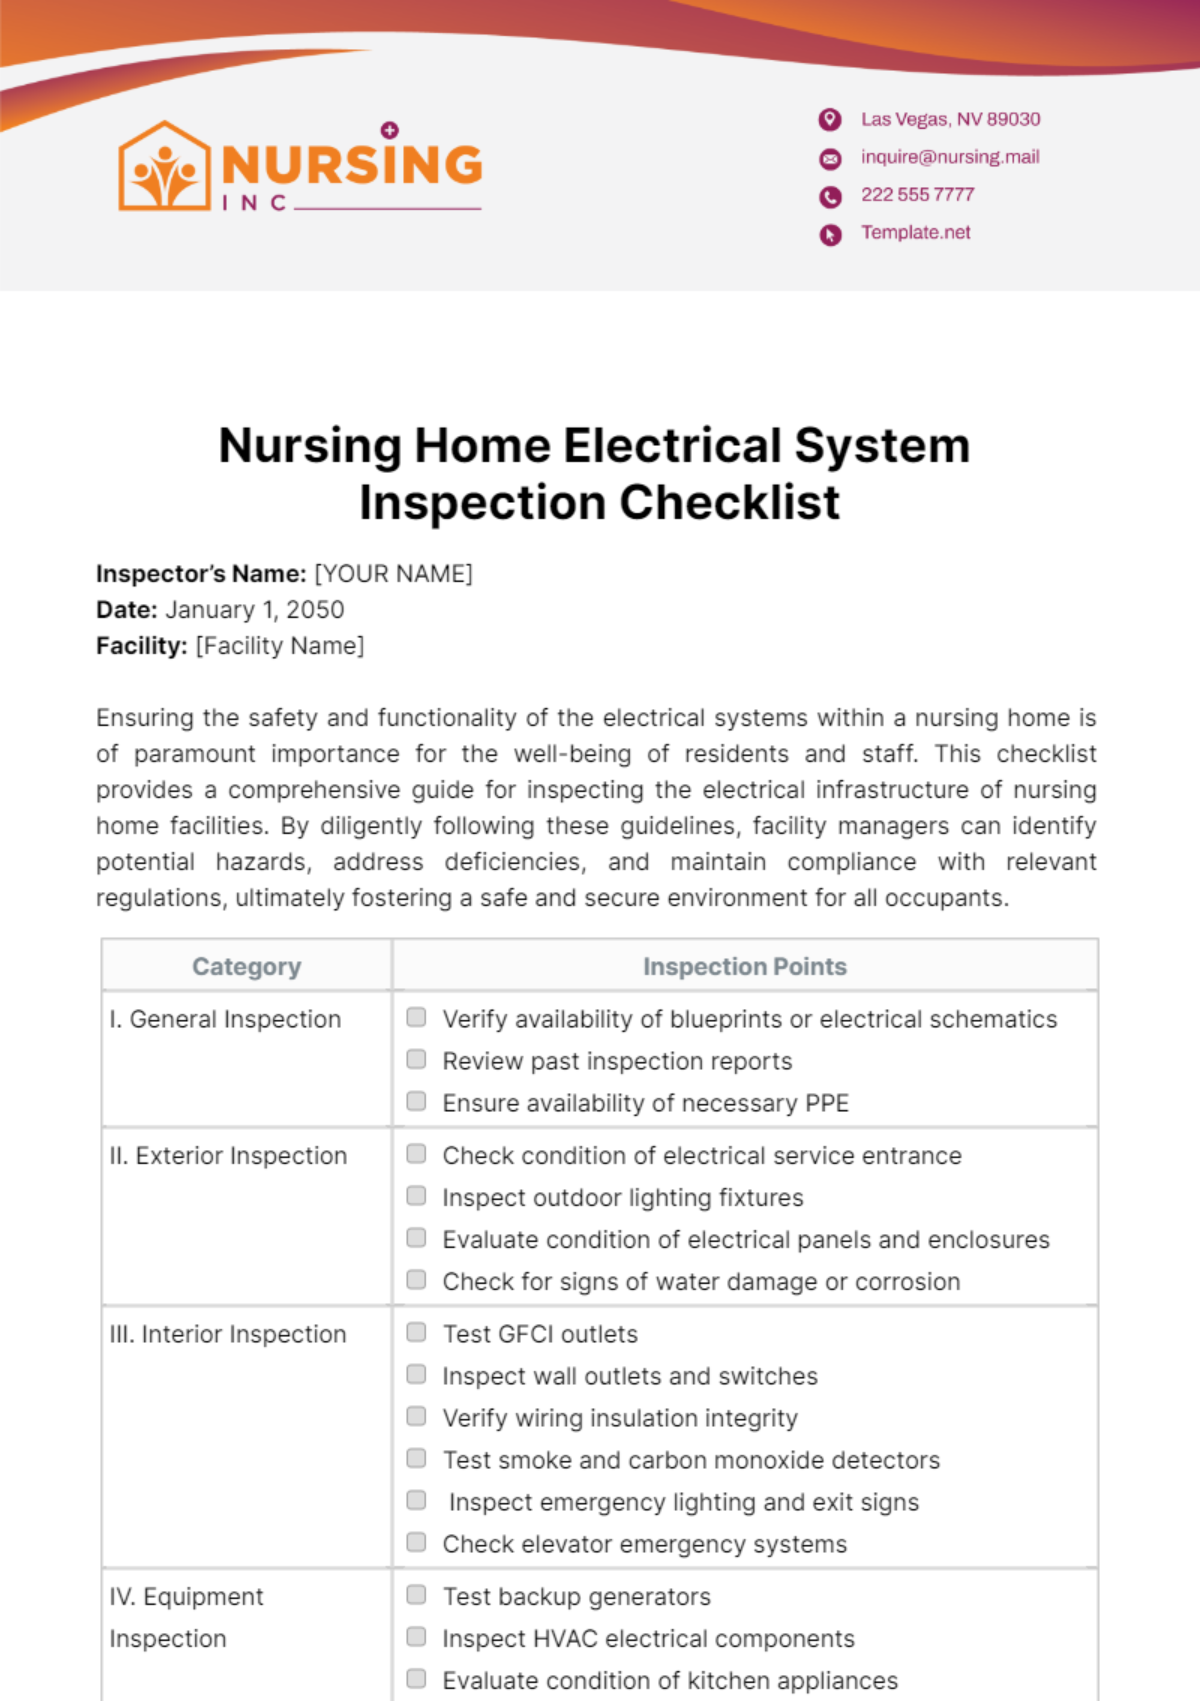 Nursing Home Electrical System Inspection Checklist Template